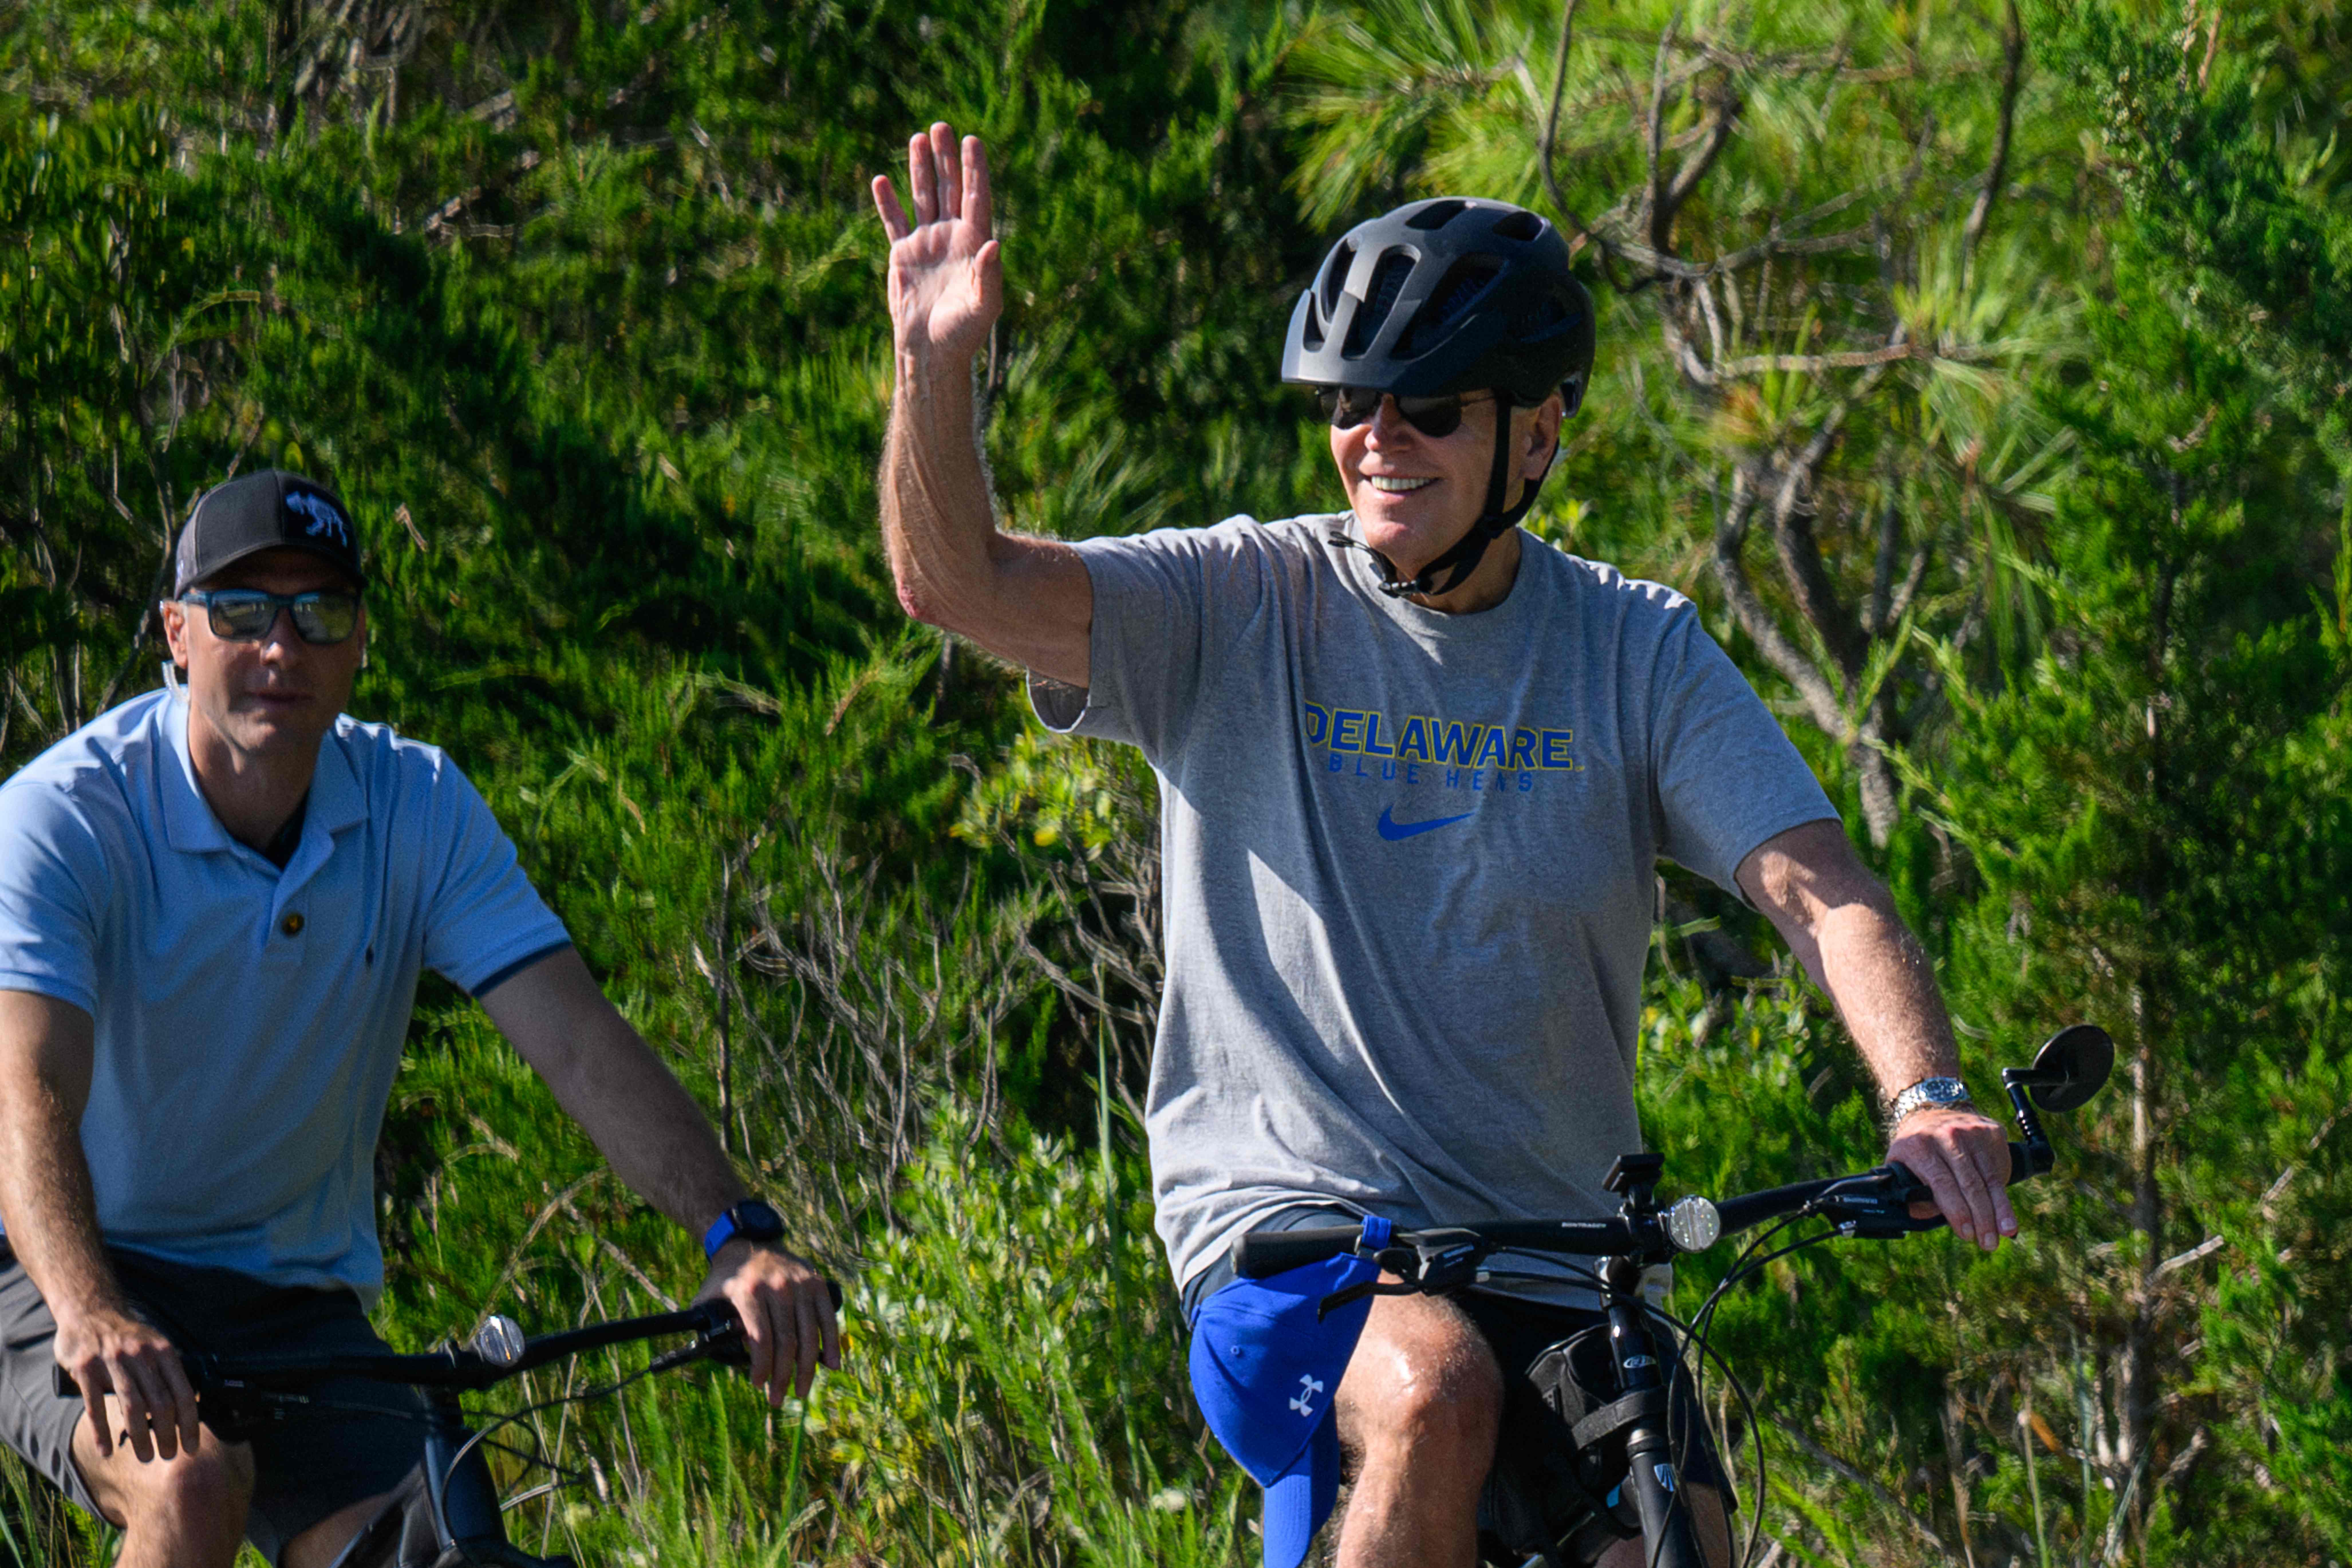 Joe Biden waves as he rides his bicycle through Cape Henlopen State Park in Rehoboth Beach on 13 August